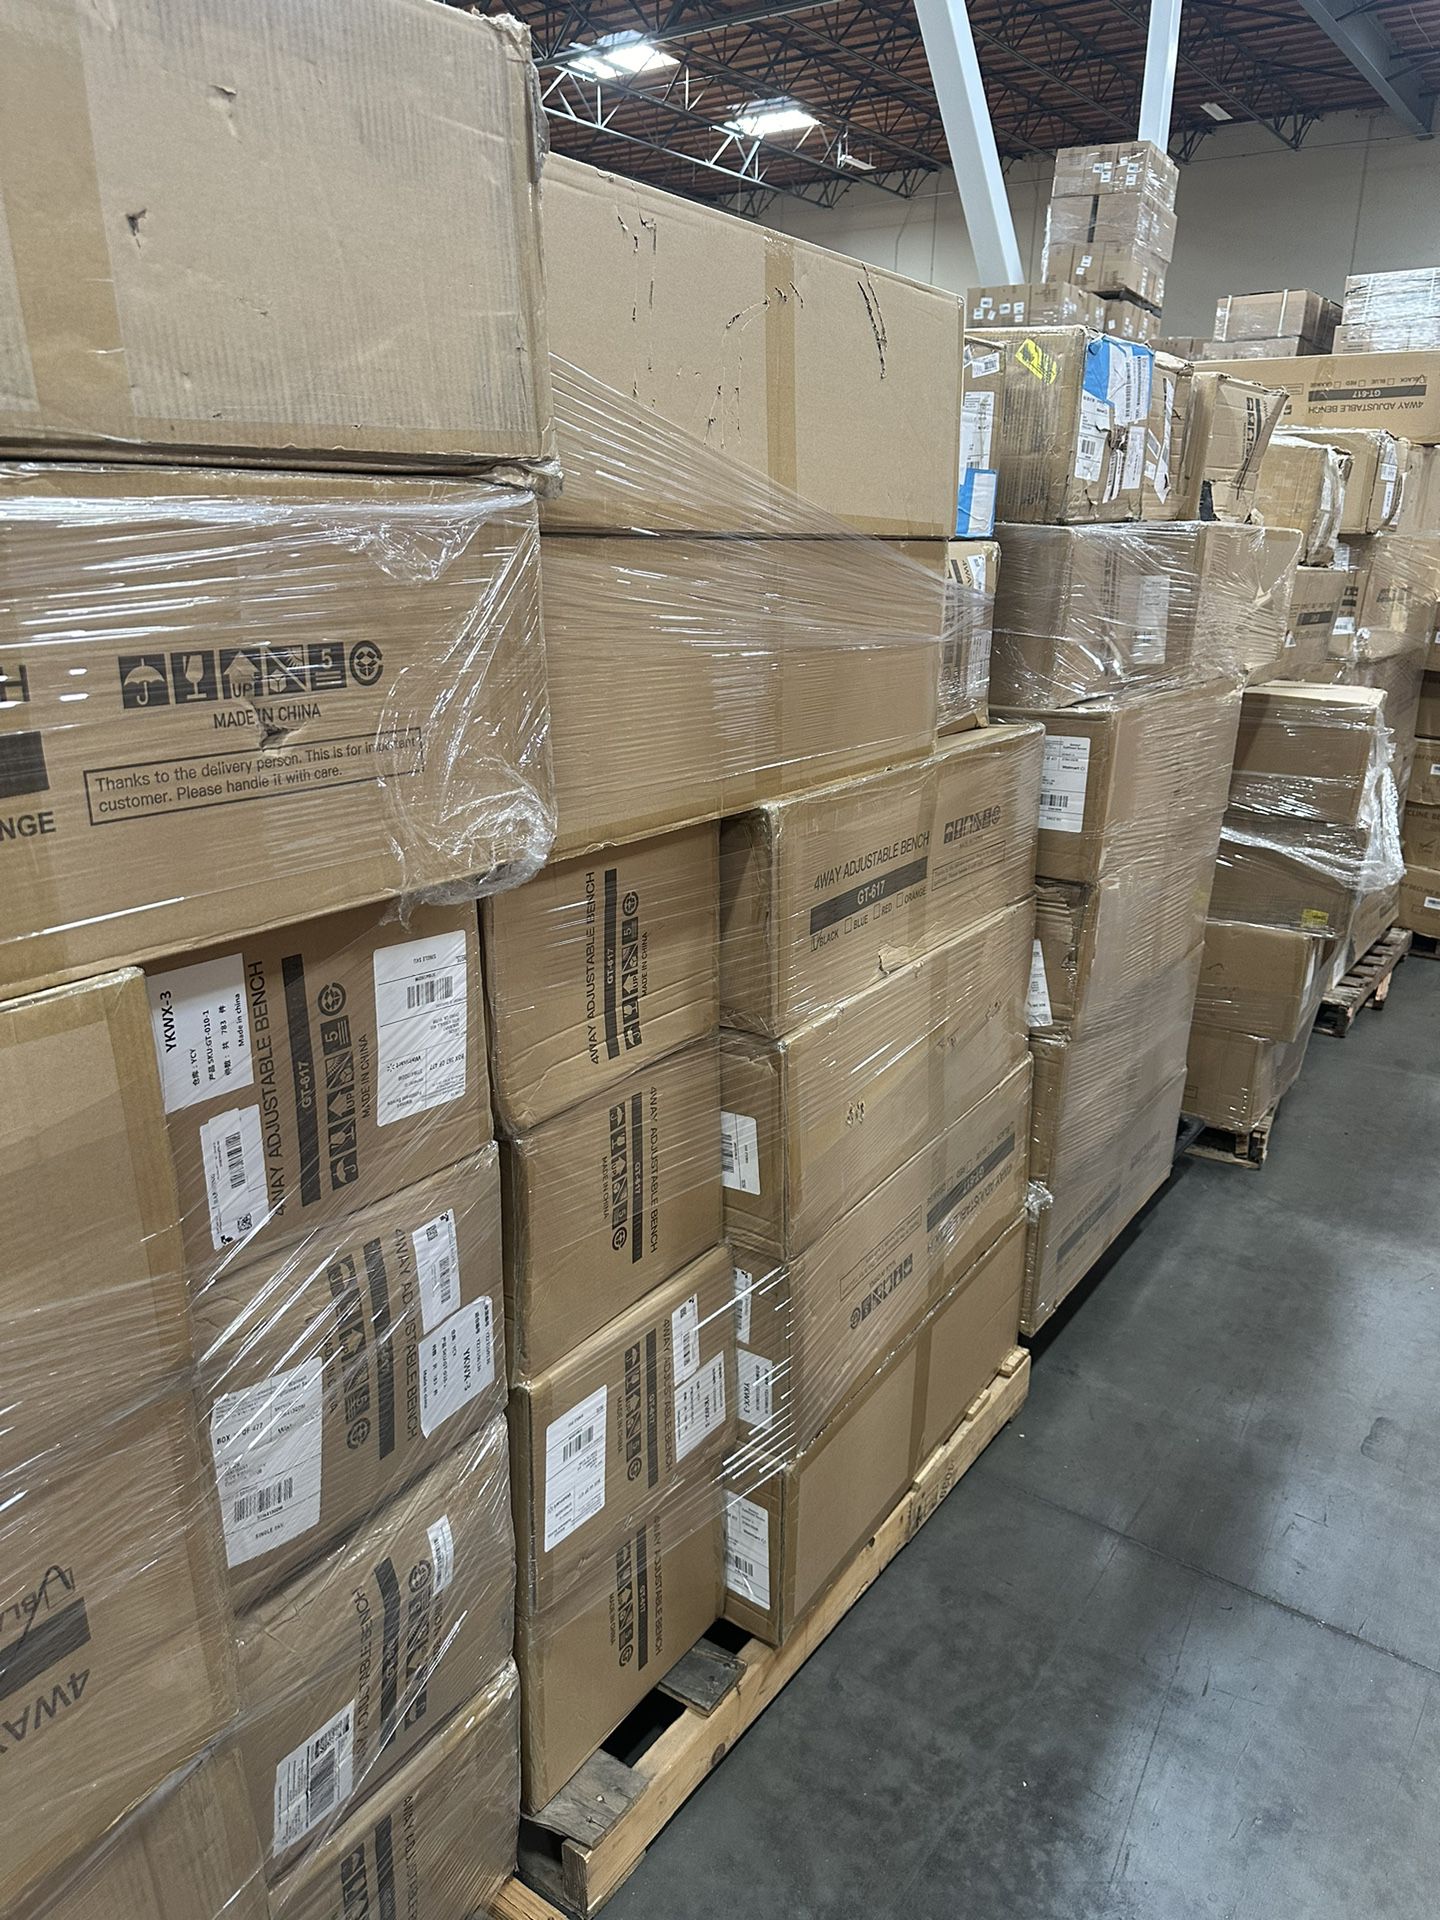 Return Pallets From Amazon/Walmart Of Weight Benches 